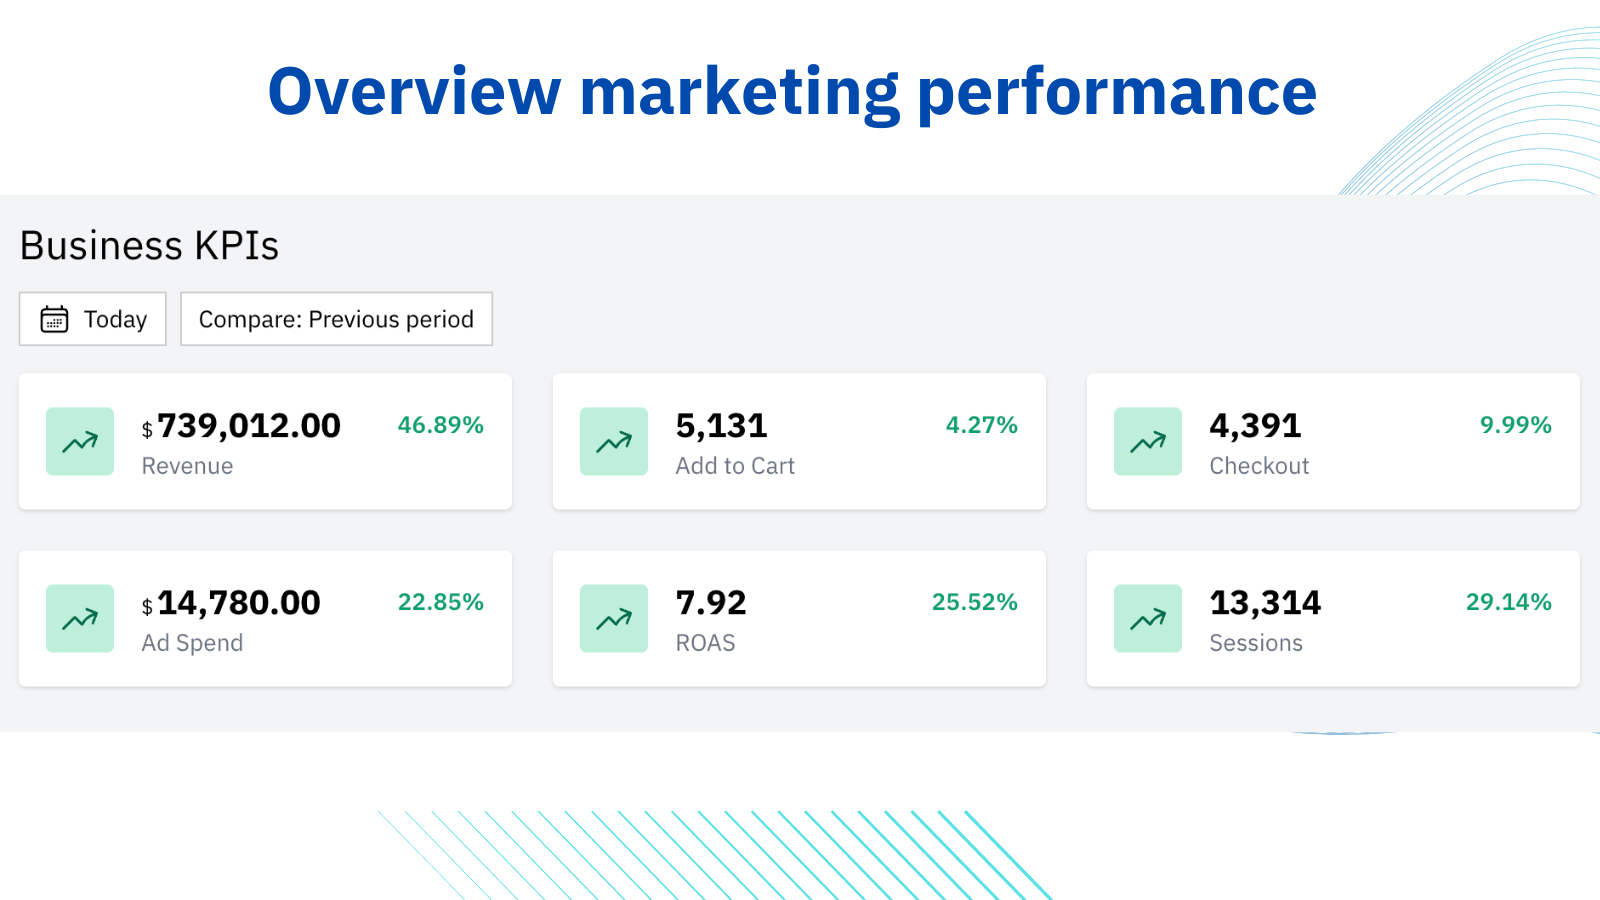 Overview marketing performance